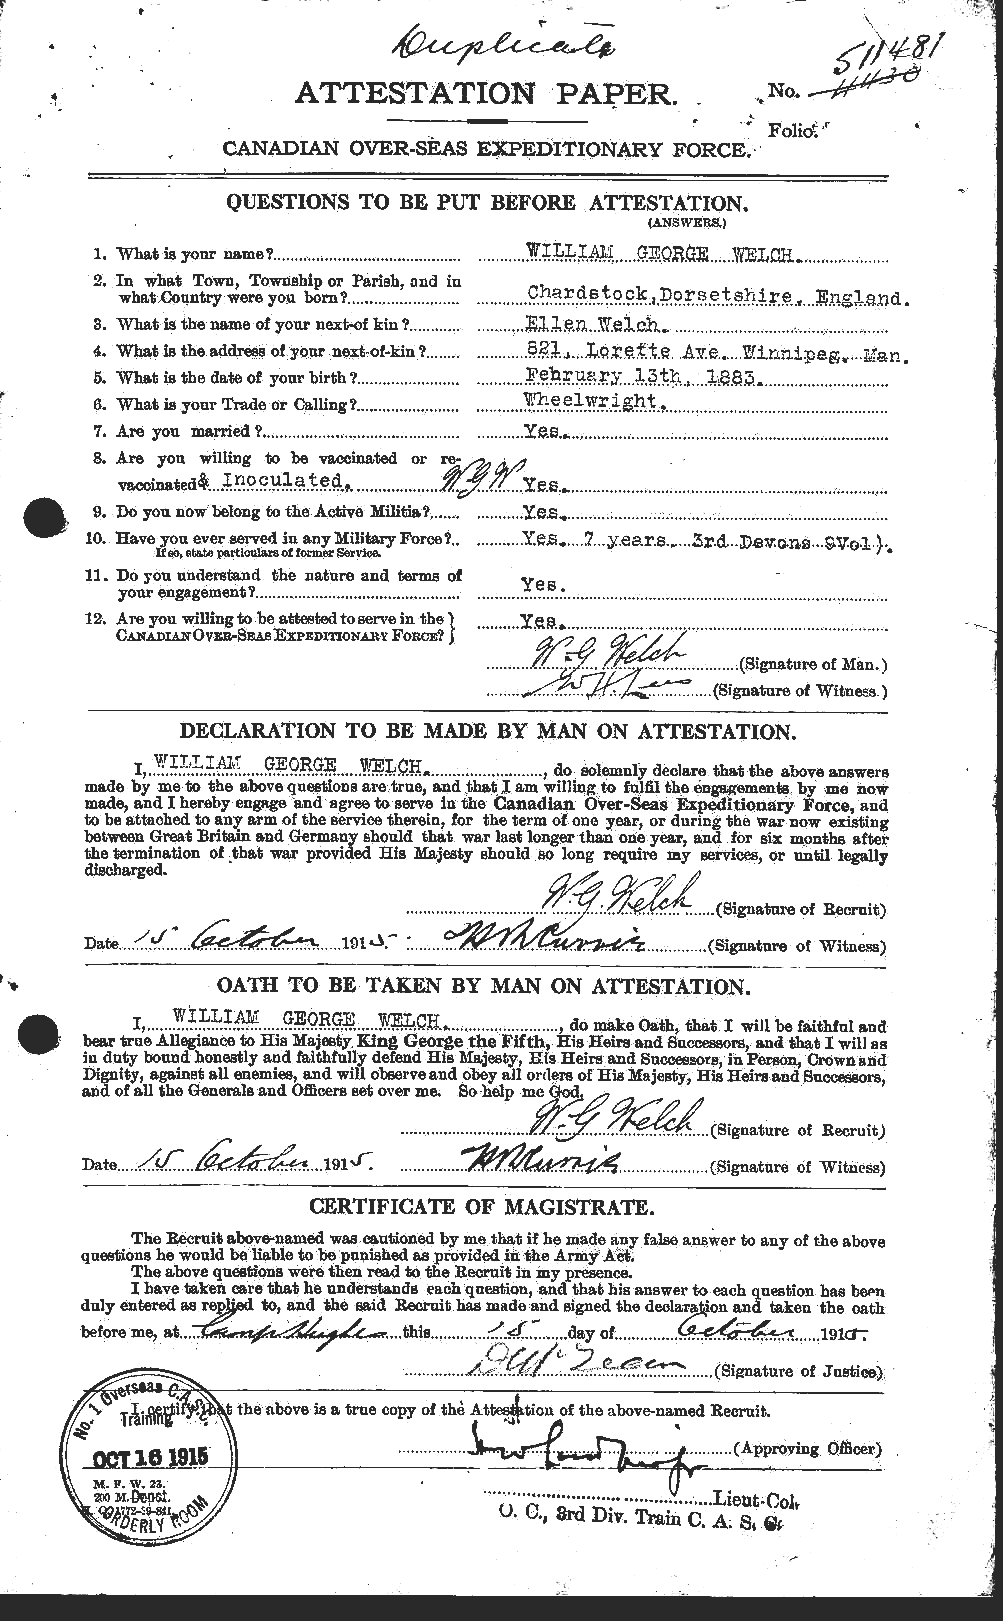 Personnel Records of the First World War - CEF 664710a